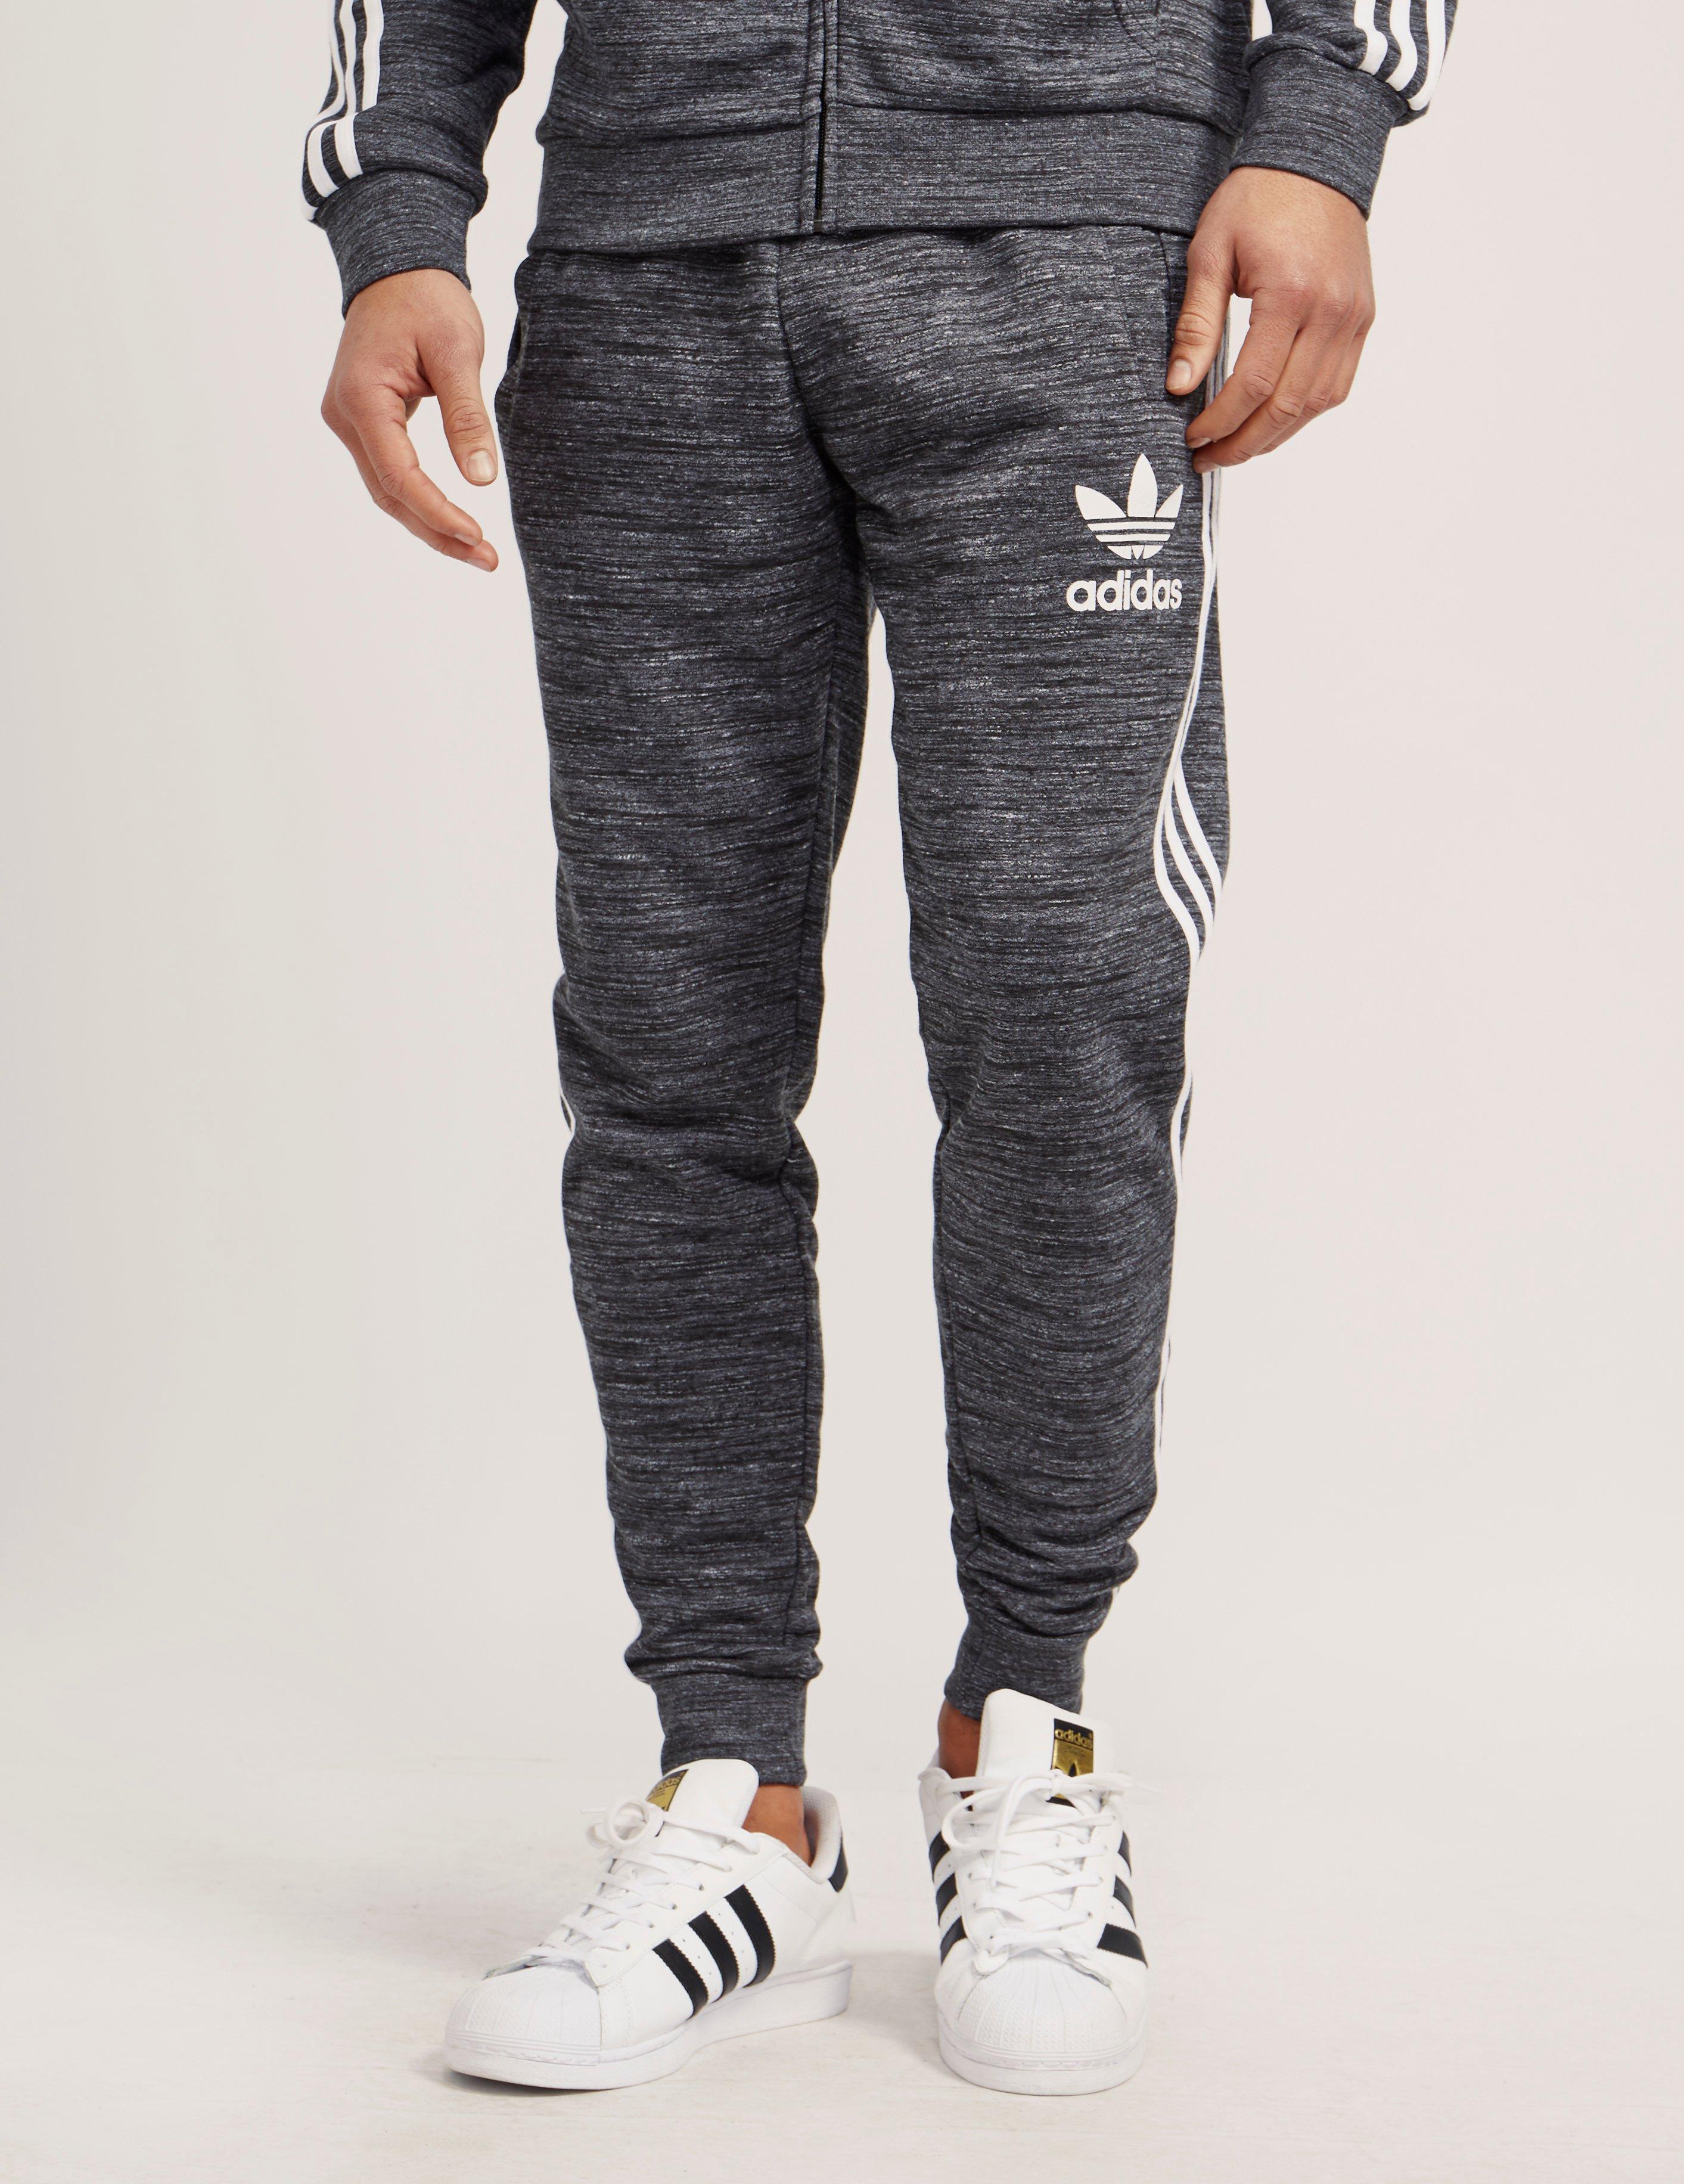 adidas Originals Cotton California Cuff Track Pants in Charcoal (Gray) for  Men - Lyst